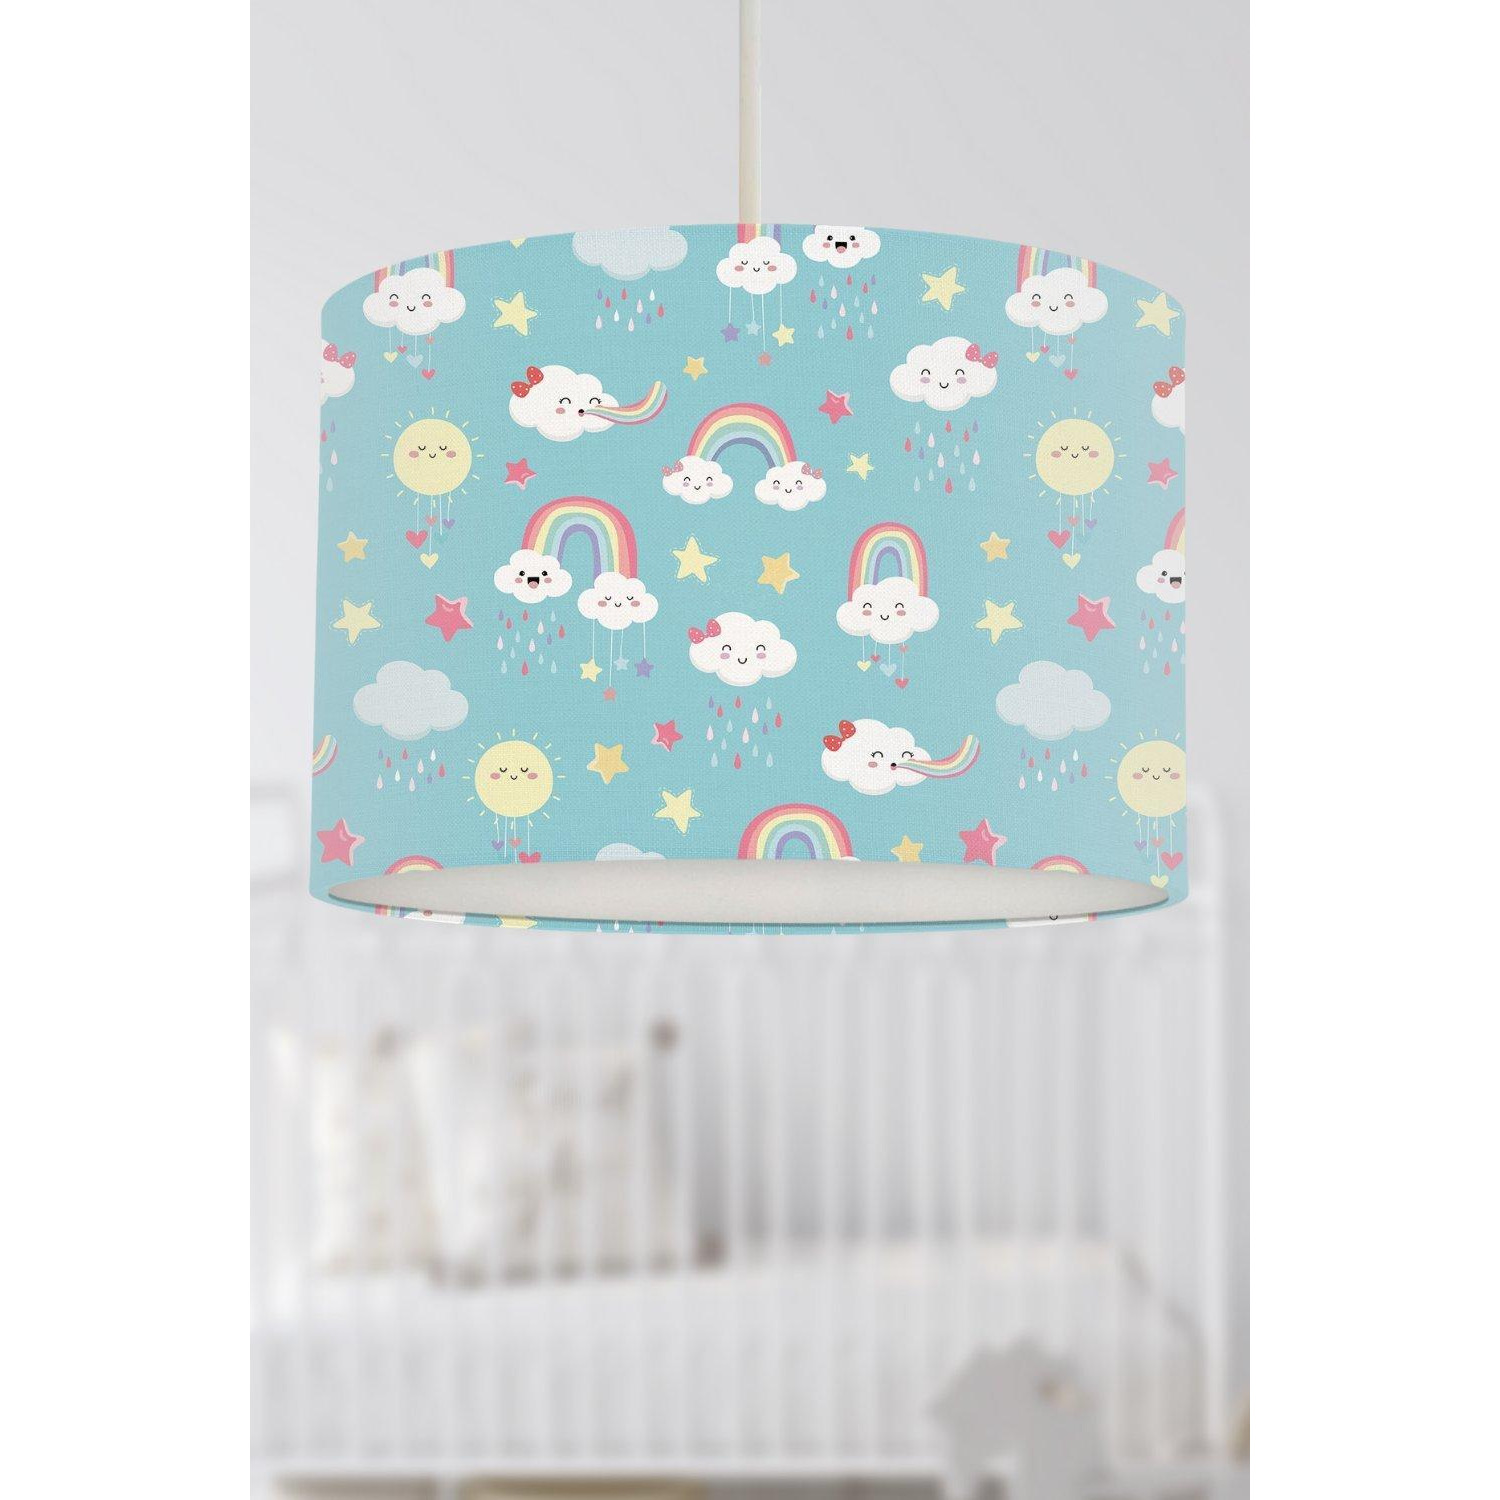 Over the Rainbow Lampshade - image 1